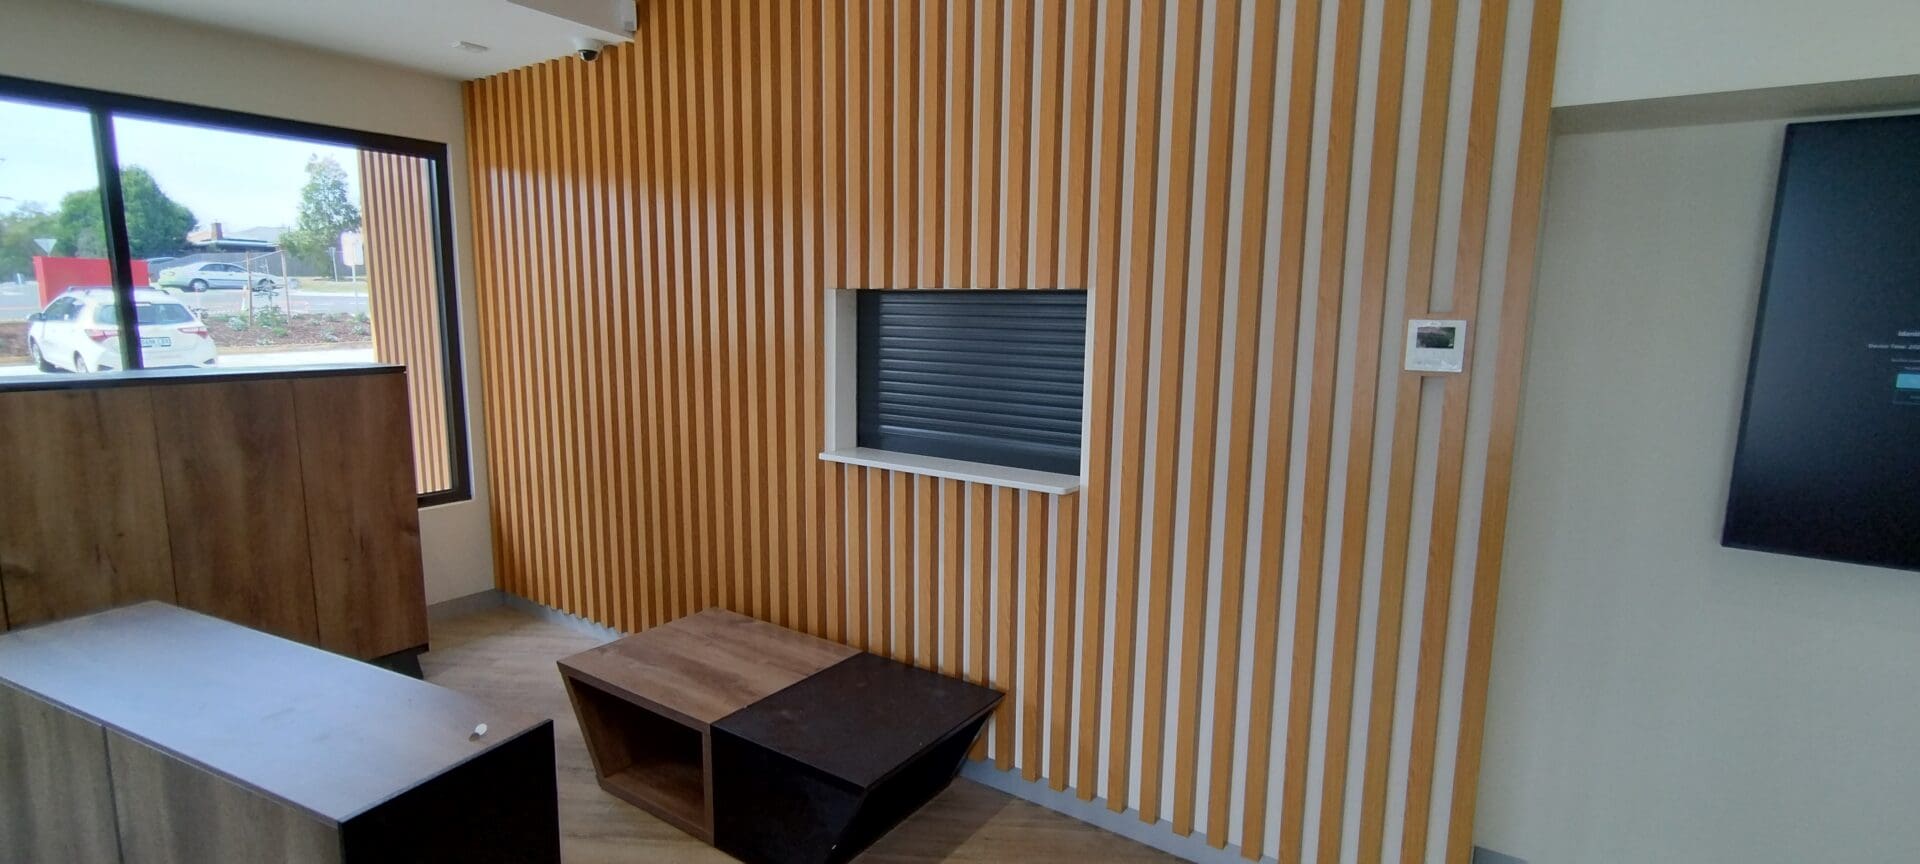 Inside house roller shutter privacy policy